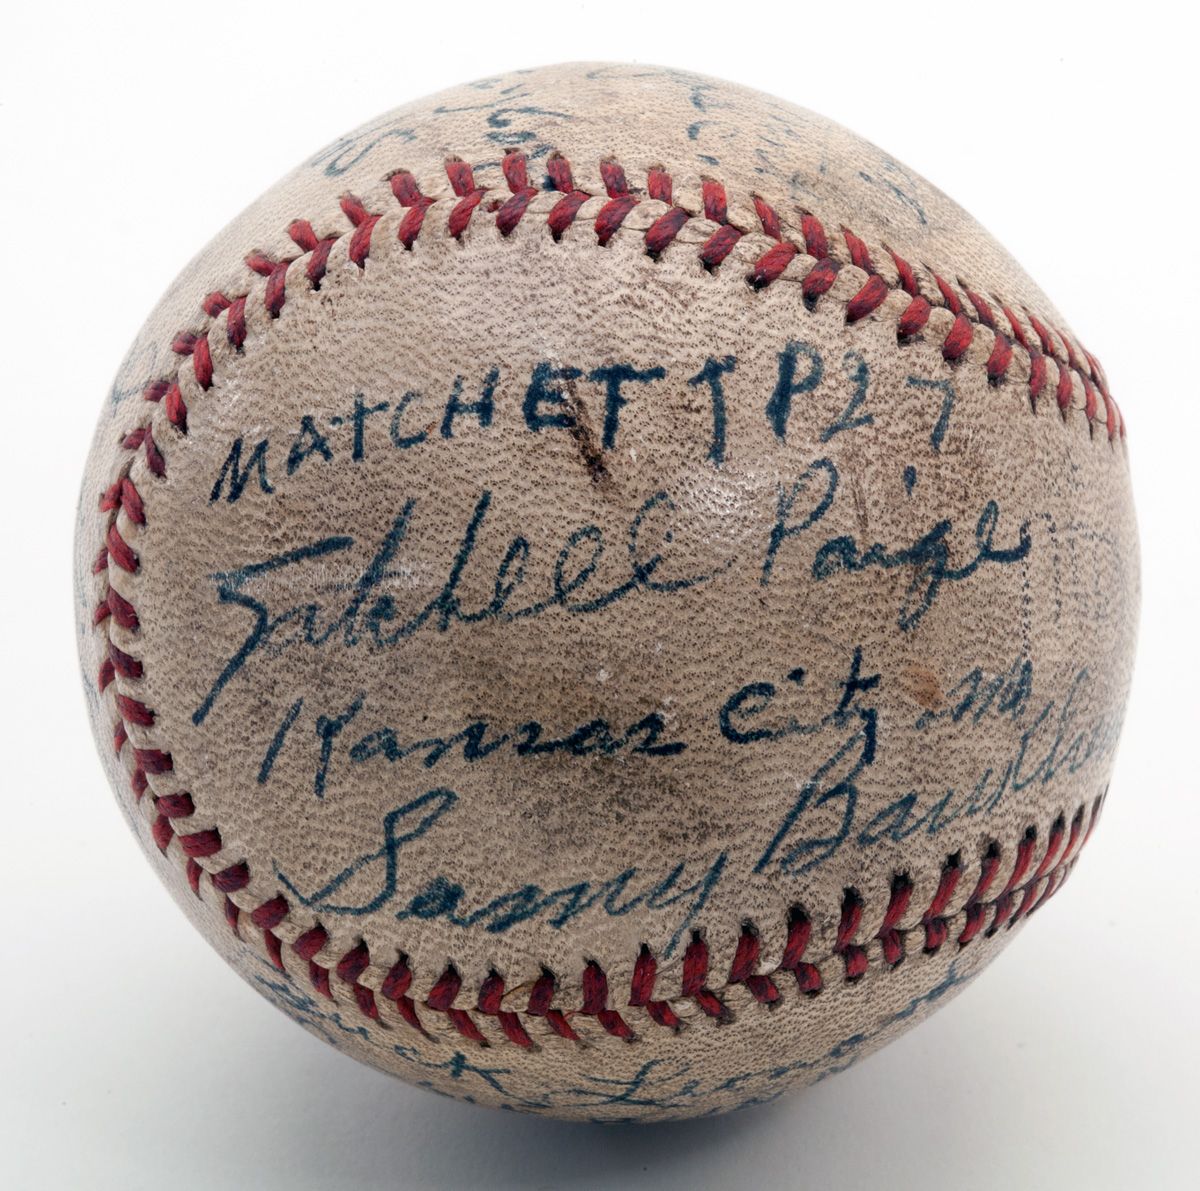 Lot Detail - RARE AND SIGNIFICANT 1942 NEGRO LEAGUE AUTOGRAPHED BASEBALL  WITH FOUR HALL OF FAMERS INCL. JOSH GIBSON AND SATCHEL PAIGE (EX-DAVID  WELLS COLLECTION)